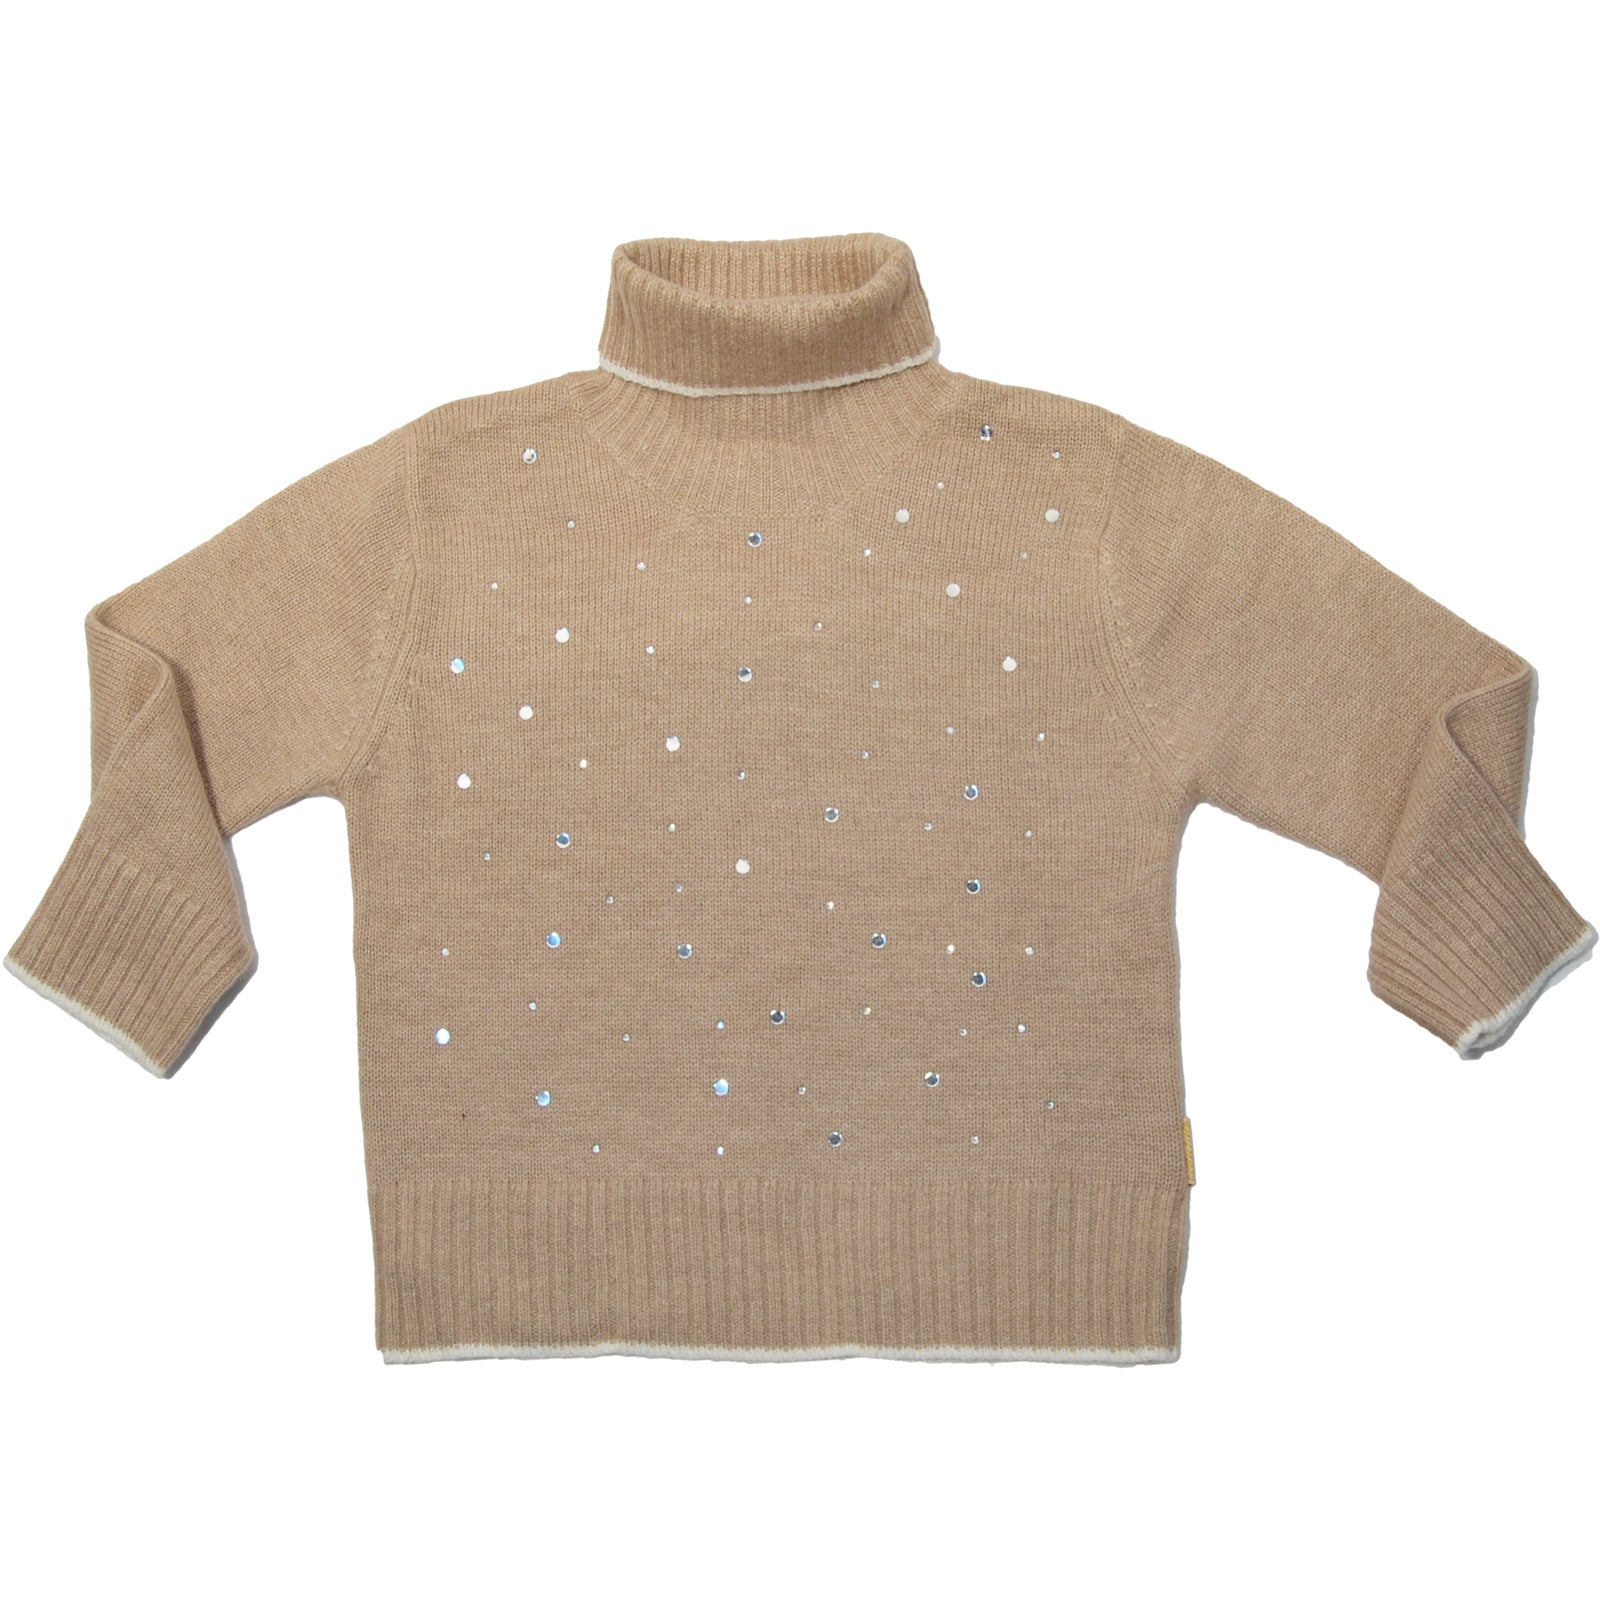 
  Turtleneck sweater from the girls' clothing line Mirtillo, with rhinestone appliqué on the fro...